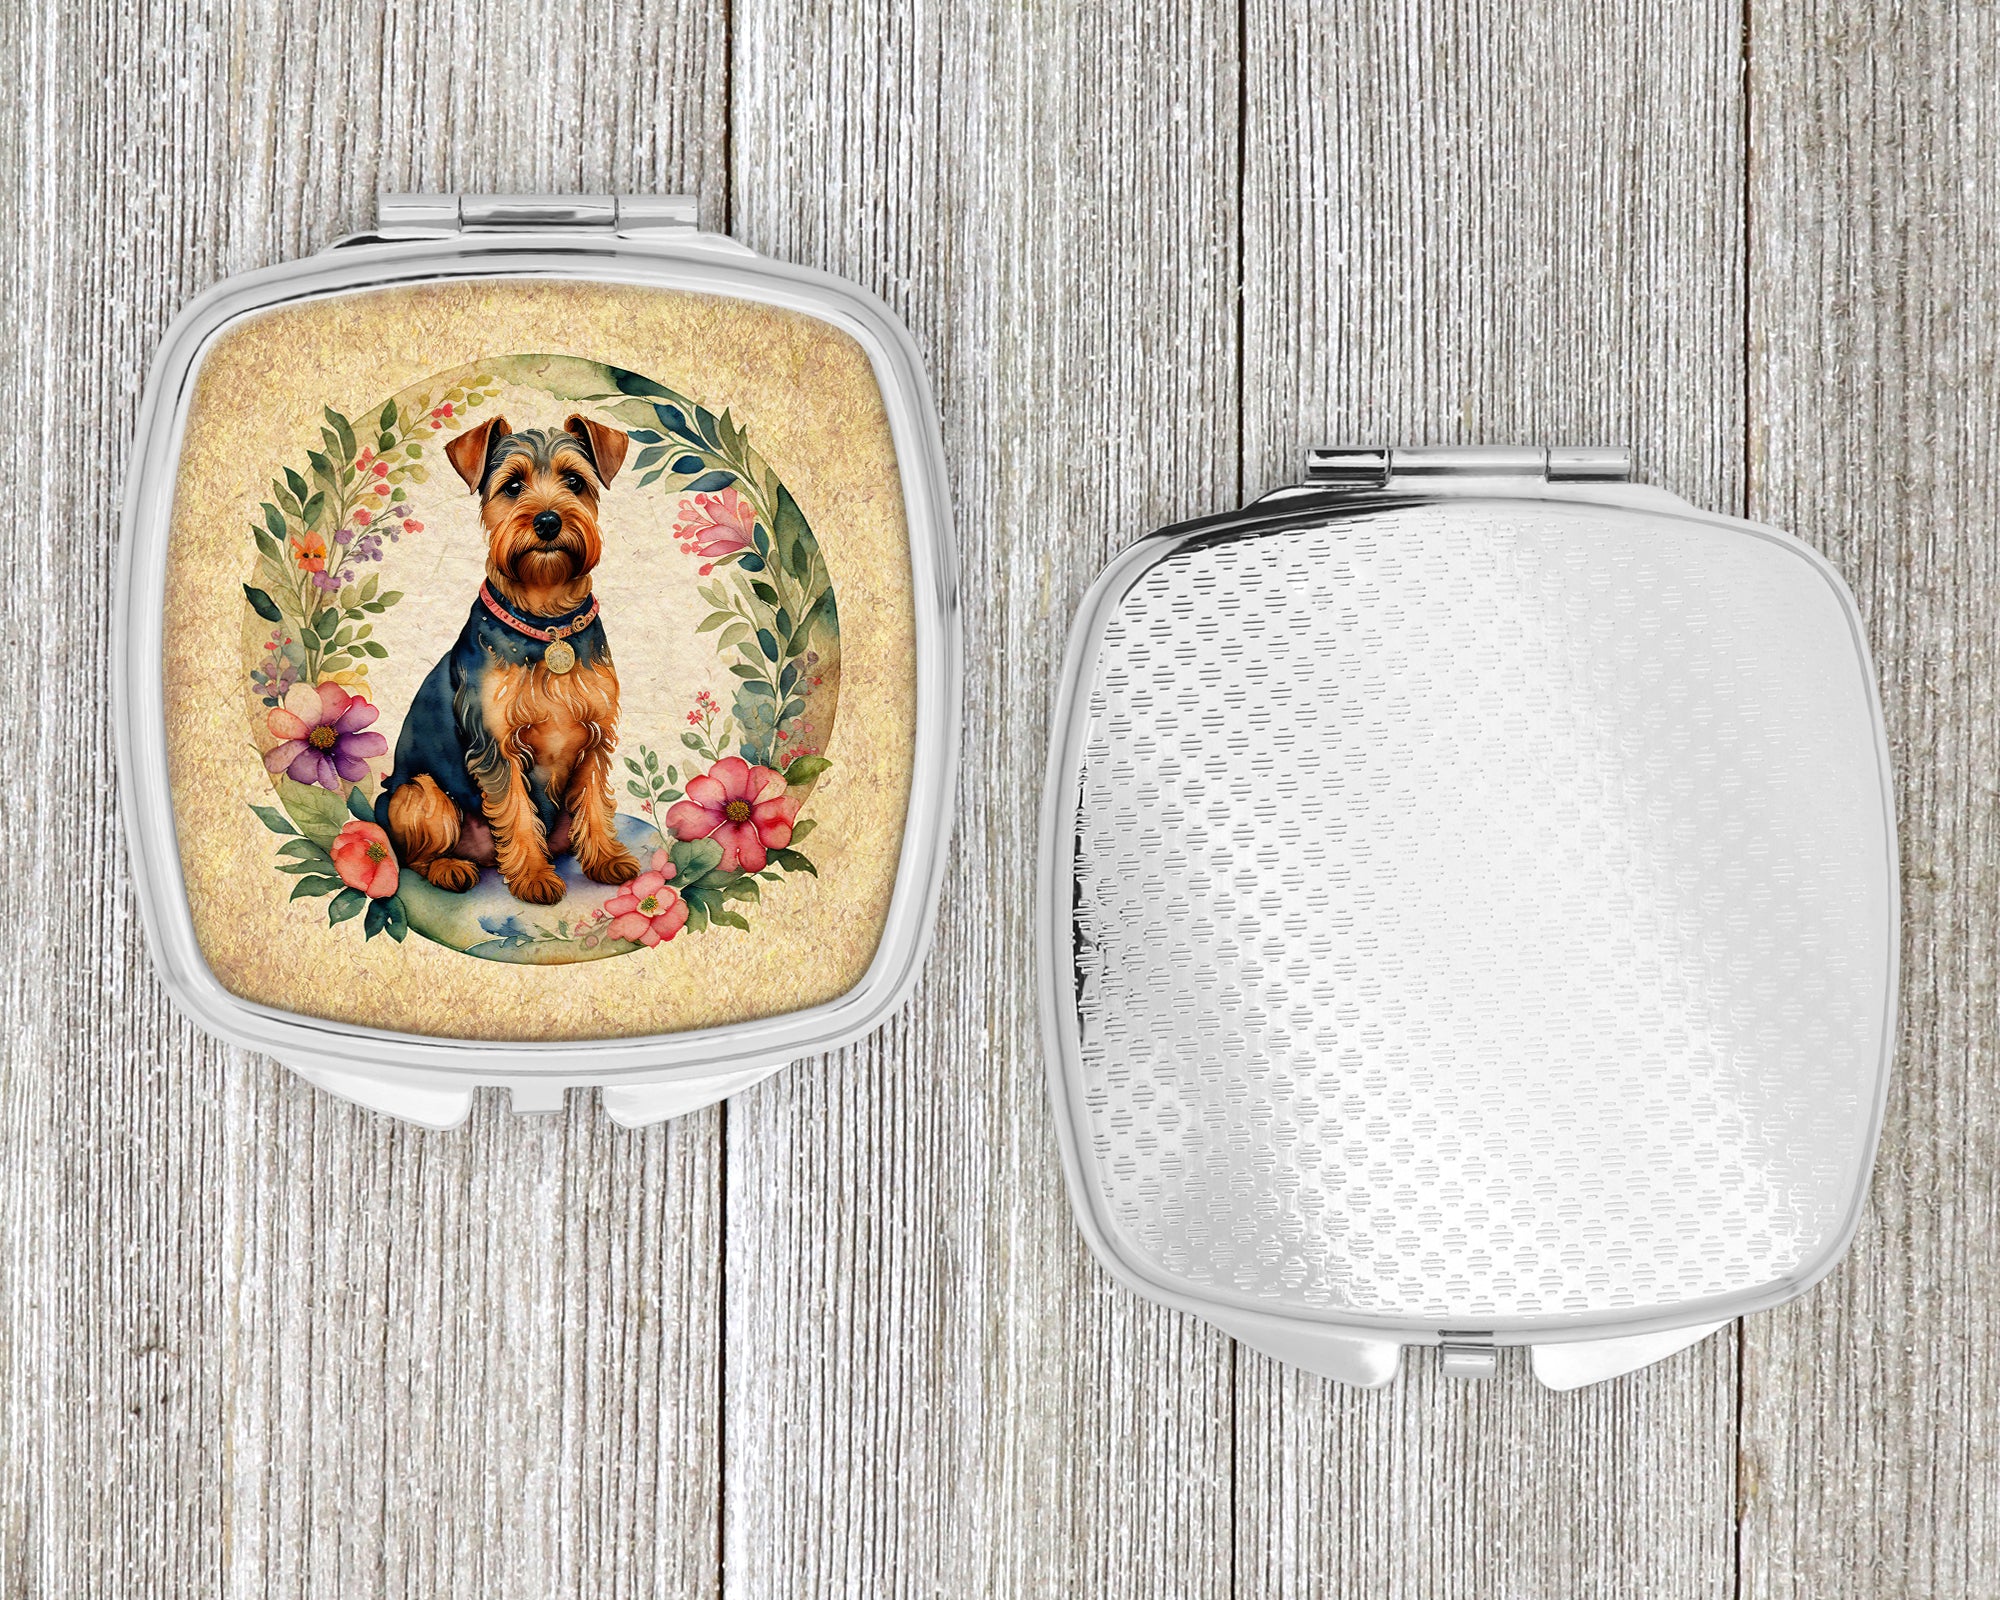 Welsh Terrier and Flowers Compact Mirror